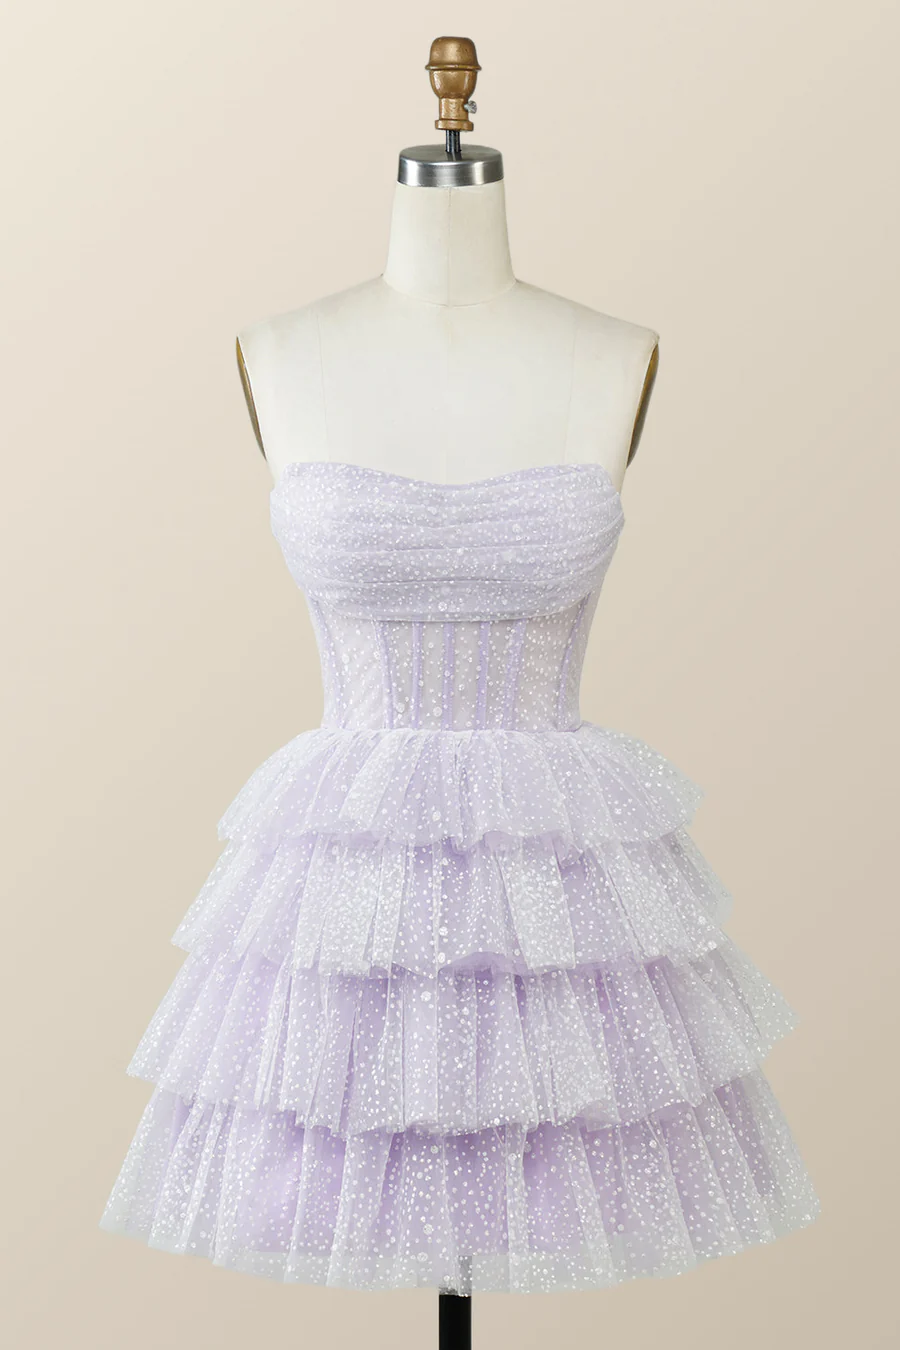 Lavender Strapless Cowl Neck Short A-line Homecoming Dress  Y2780